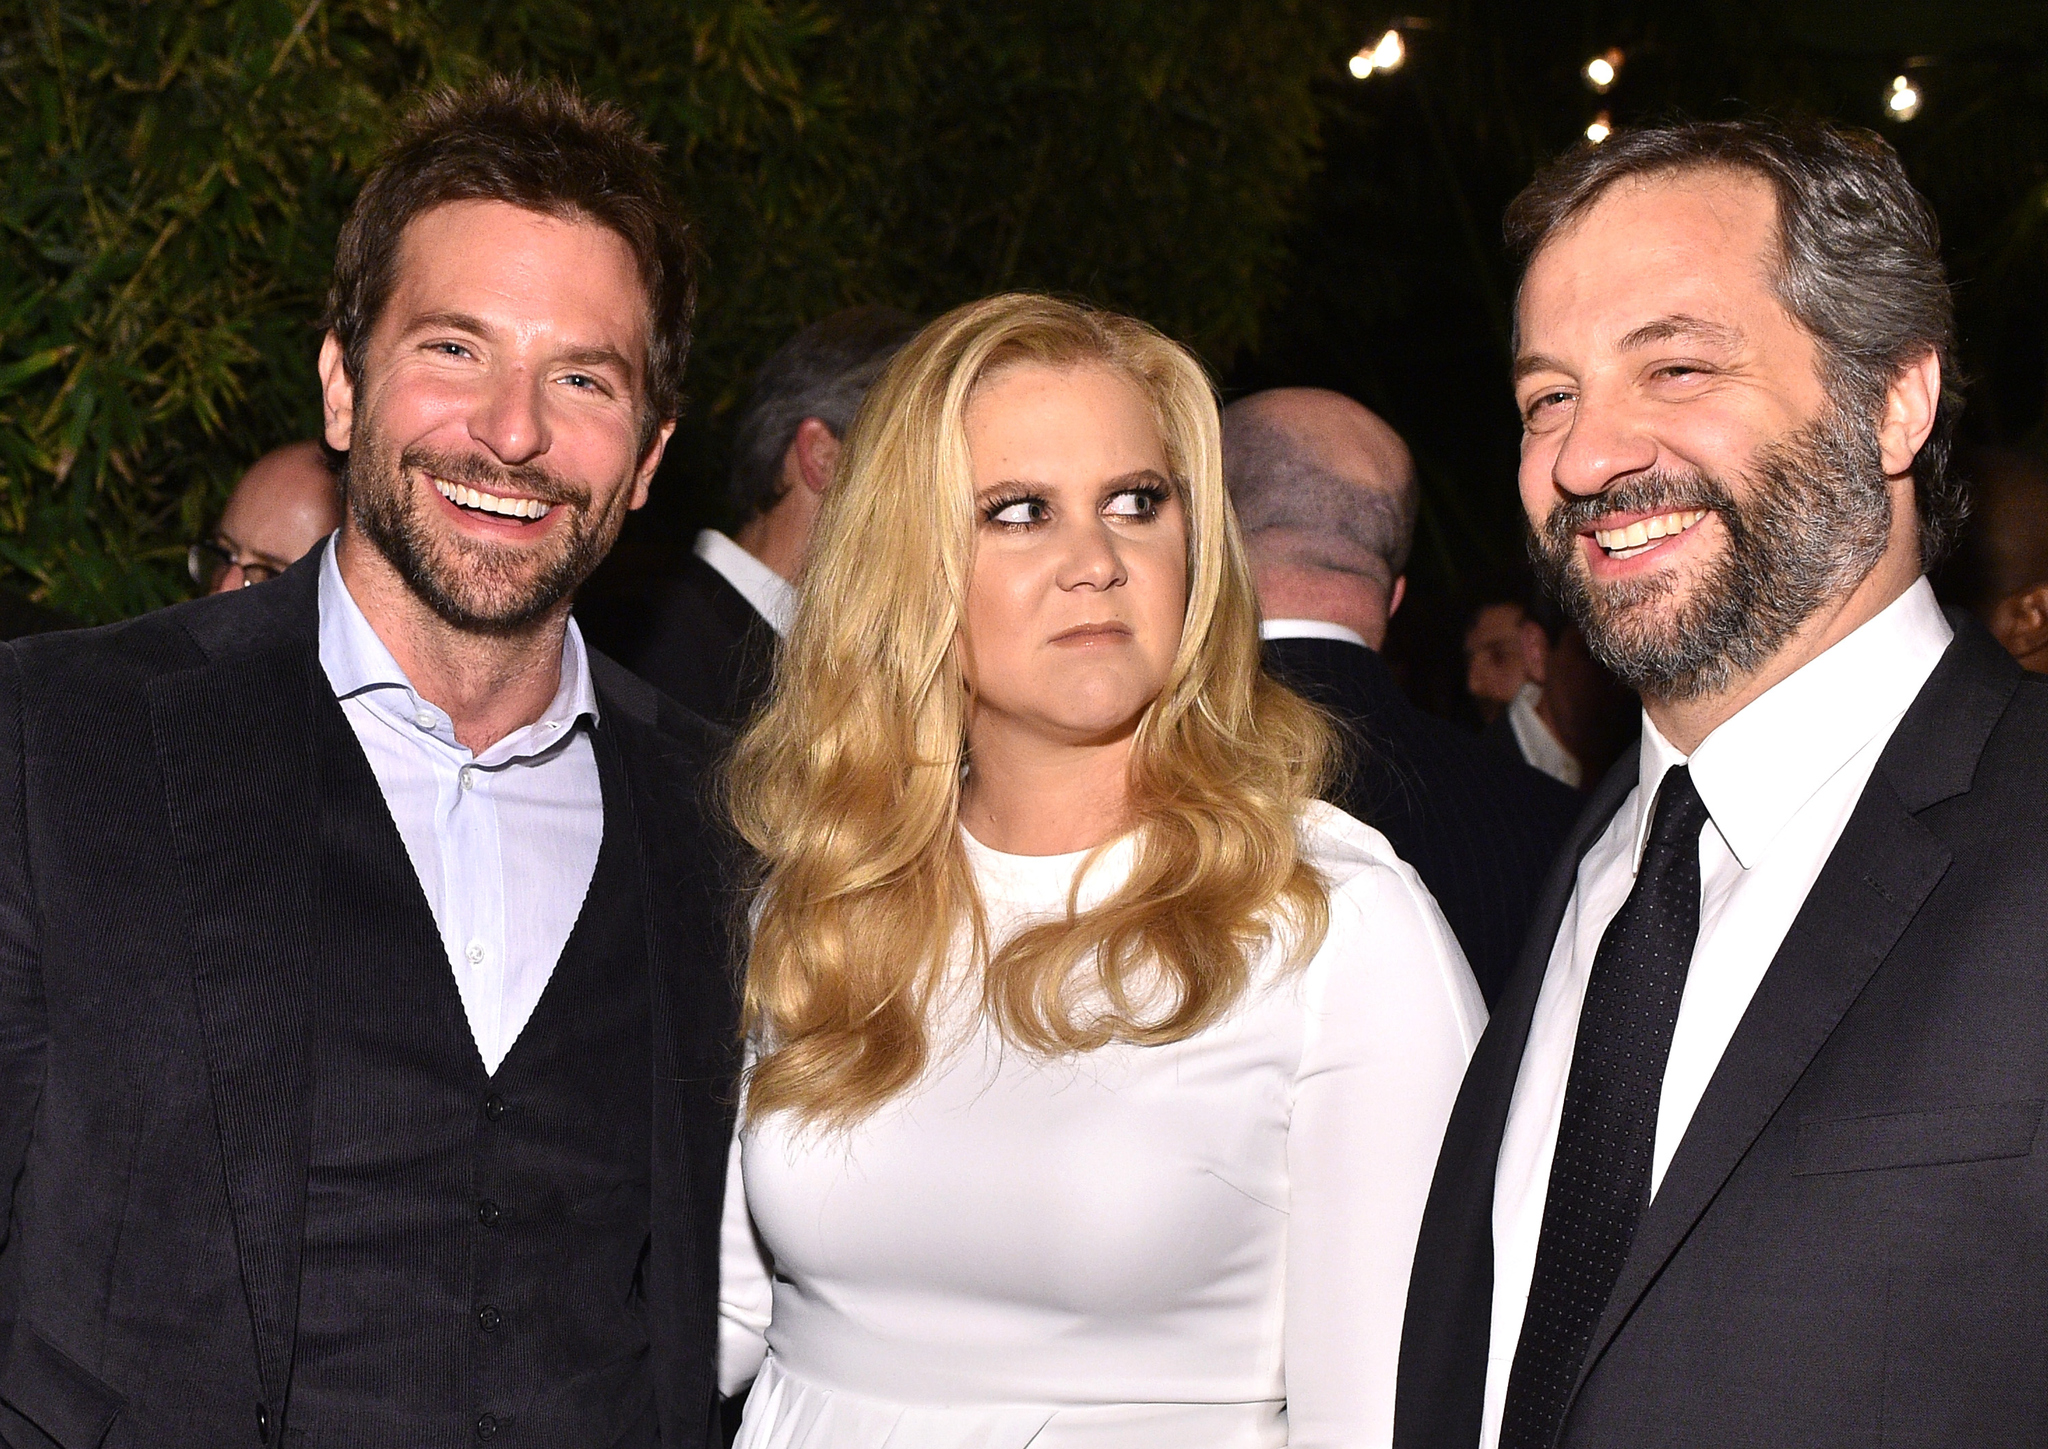 Judd Apatow, Bradley Cooper and Amy Schumer